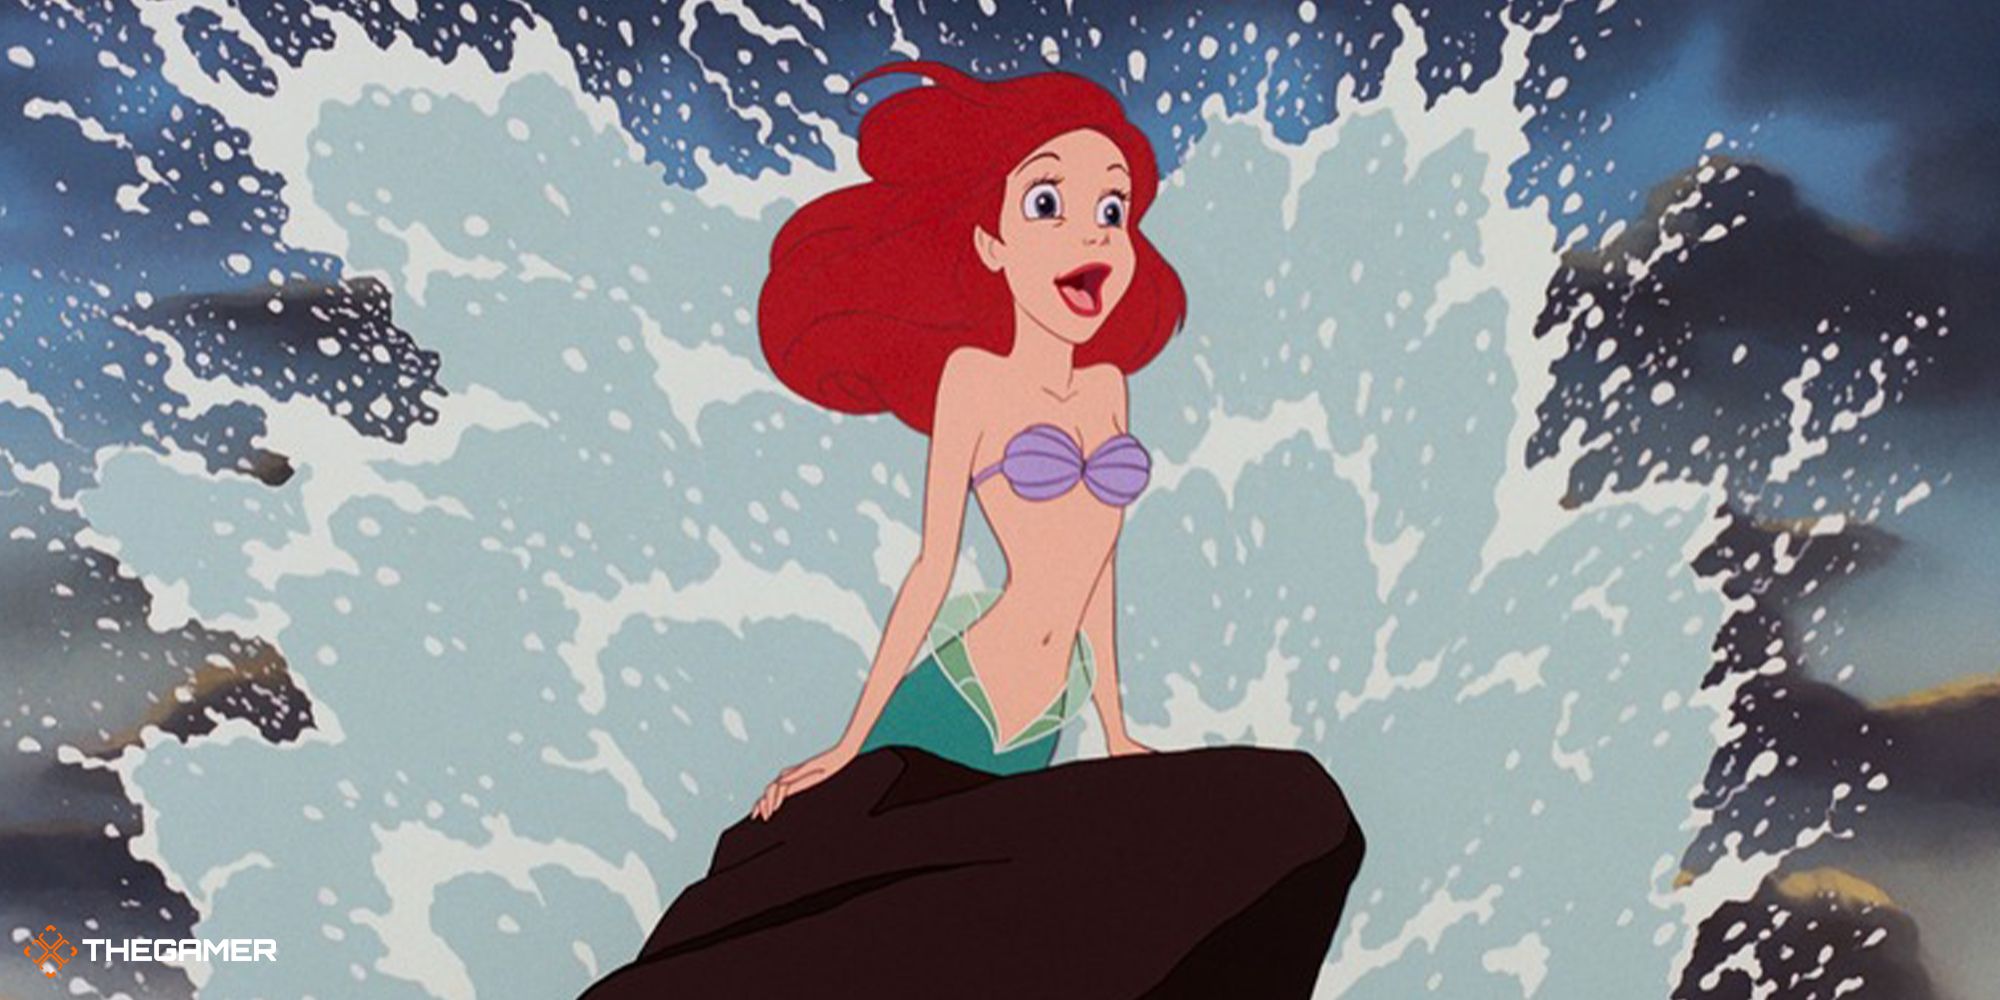 Ariel in the Little Mermaid sitting on rock with wave